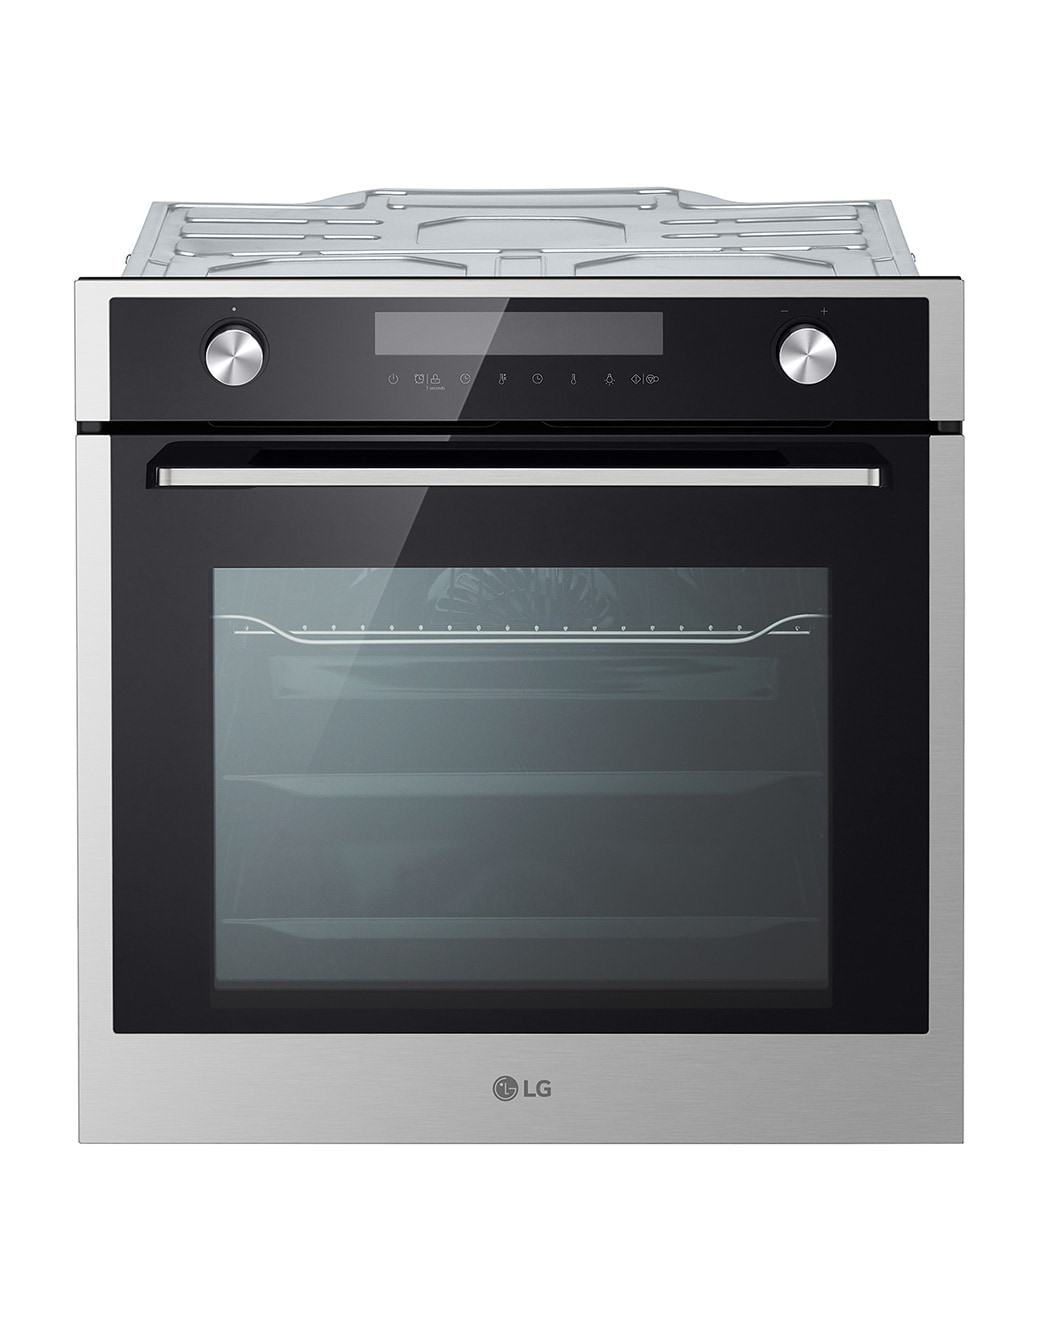 LG Silver Built-in Oven, 72L Large Capacity | LG UAE